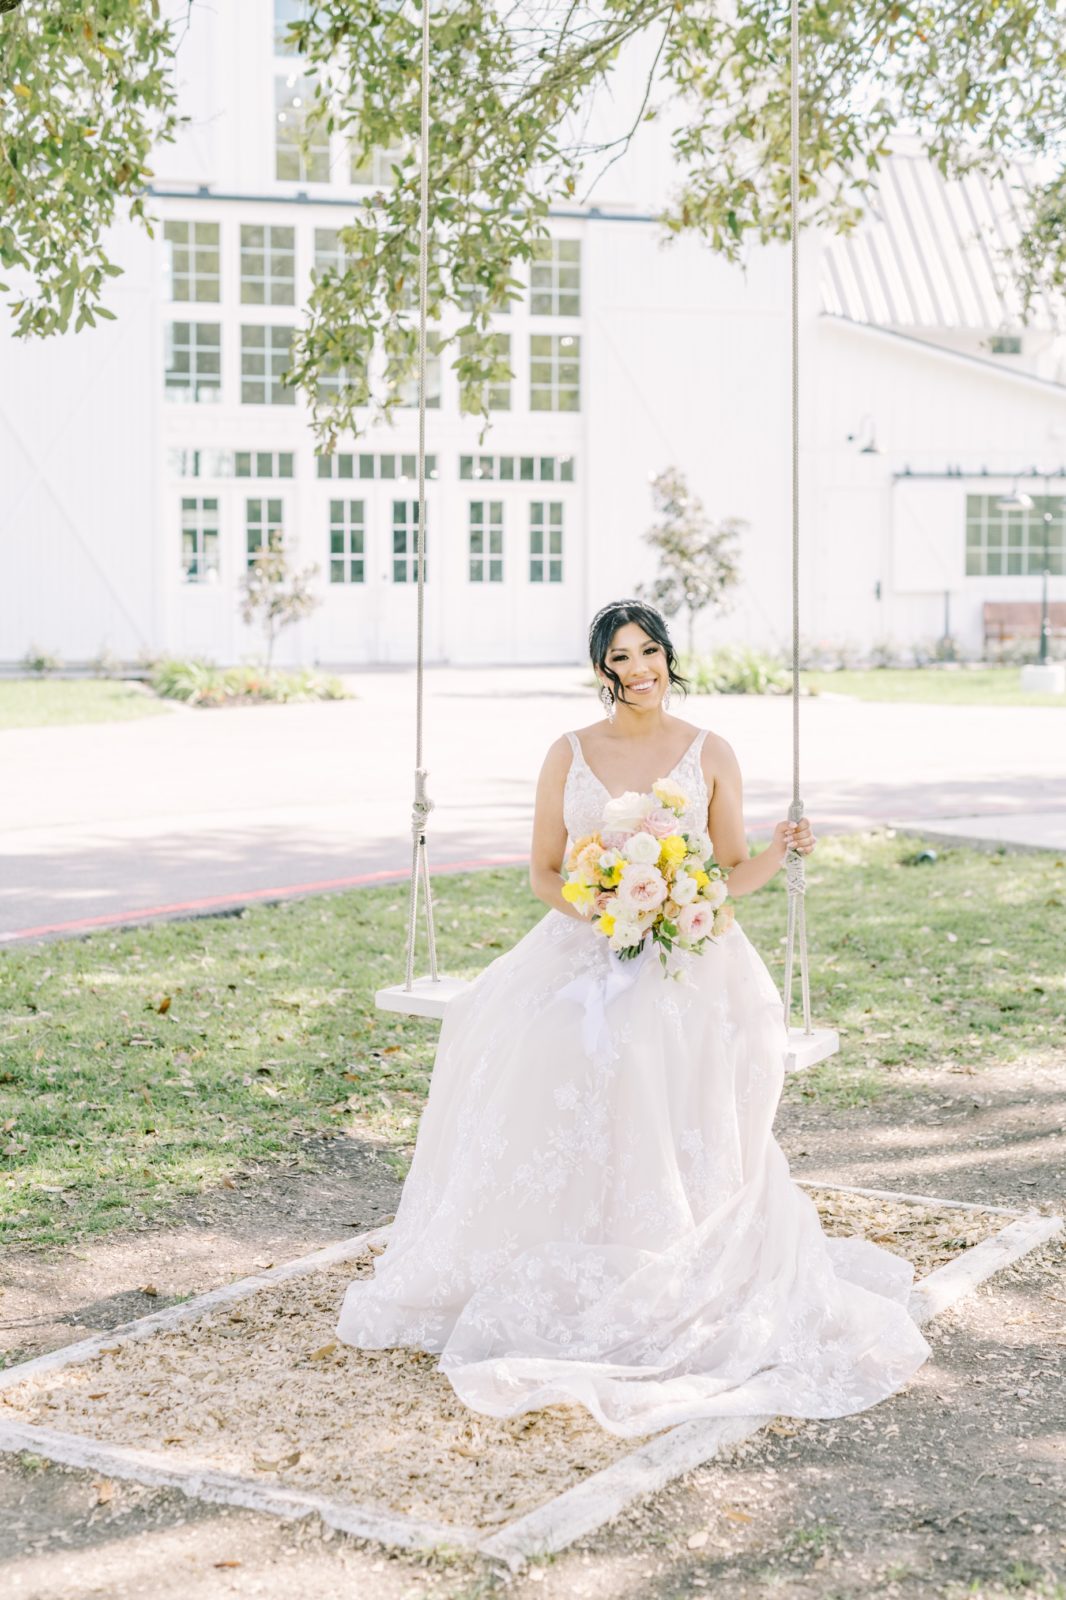 A bride wearing a lace halter wedding dress sits on a robe swing the country by Christina Elliott Photography. robe swing wedding #ChristinaElliottPhotography #ChristinaElliottWeddings #Houstonwedding #TheSpringsVenue #EastHoustonweddings #Mrs #Mr